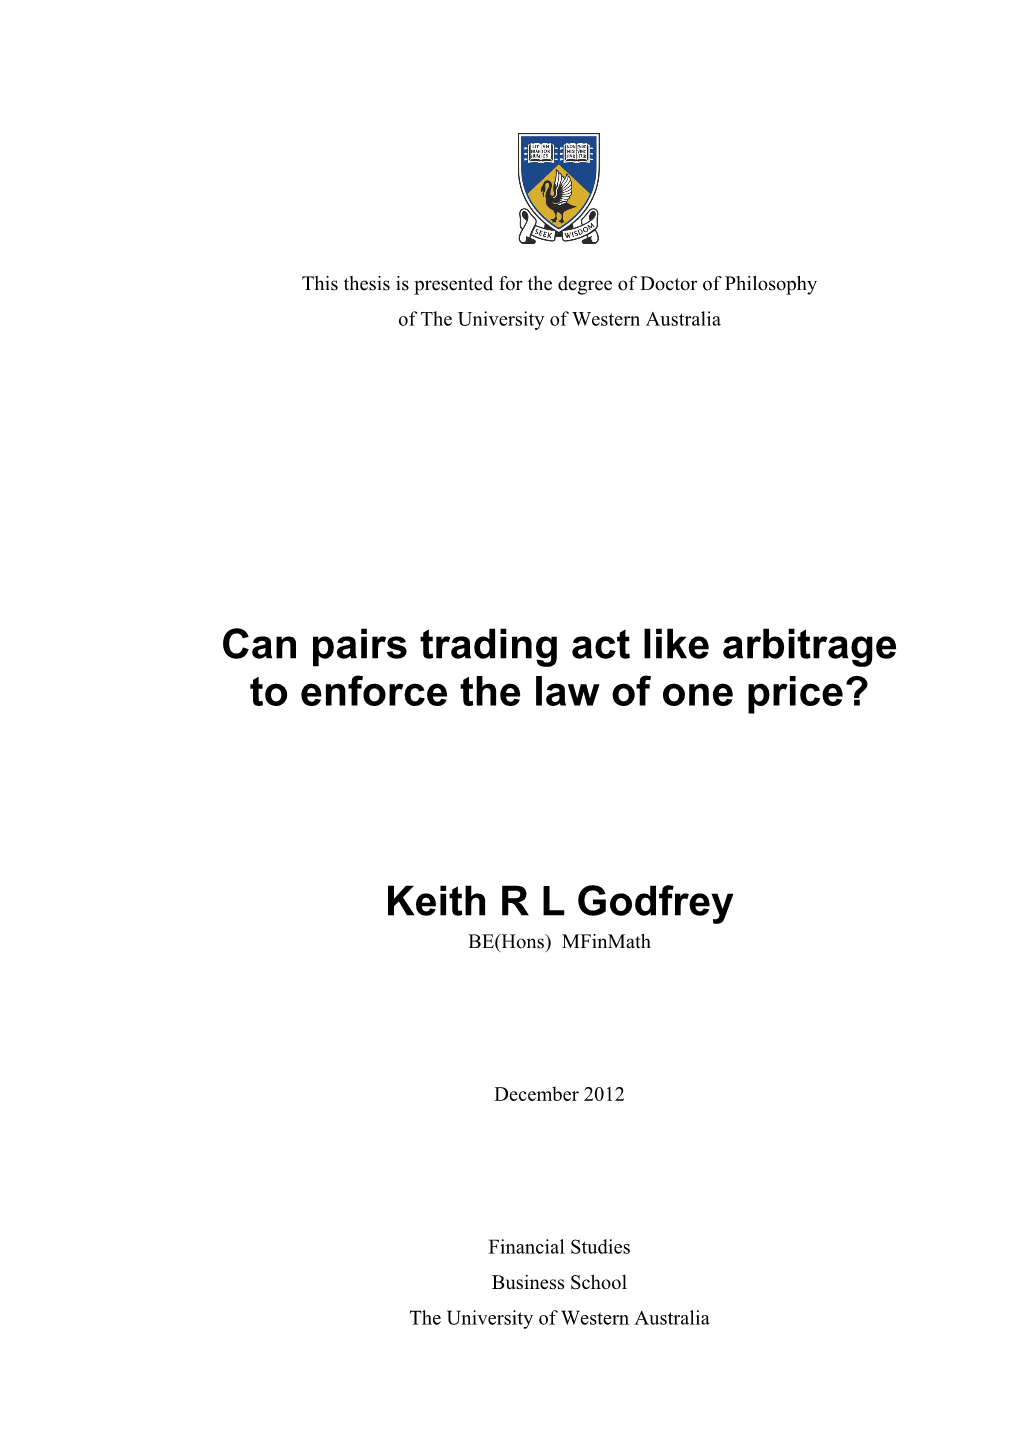 Can Pairs Trading Act Like Arbitrage to Enforce the Law of One Price?